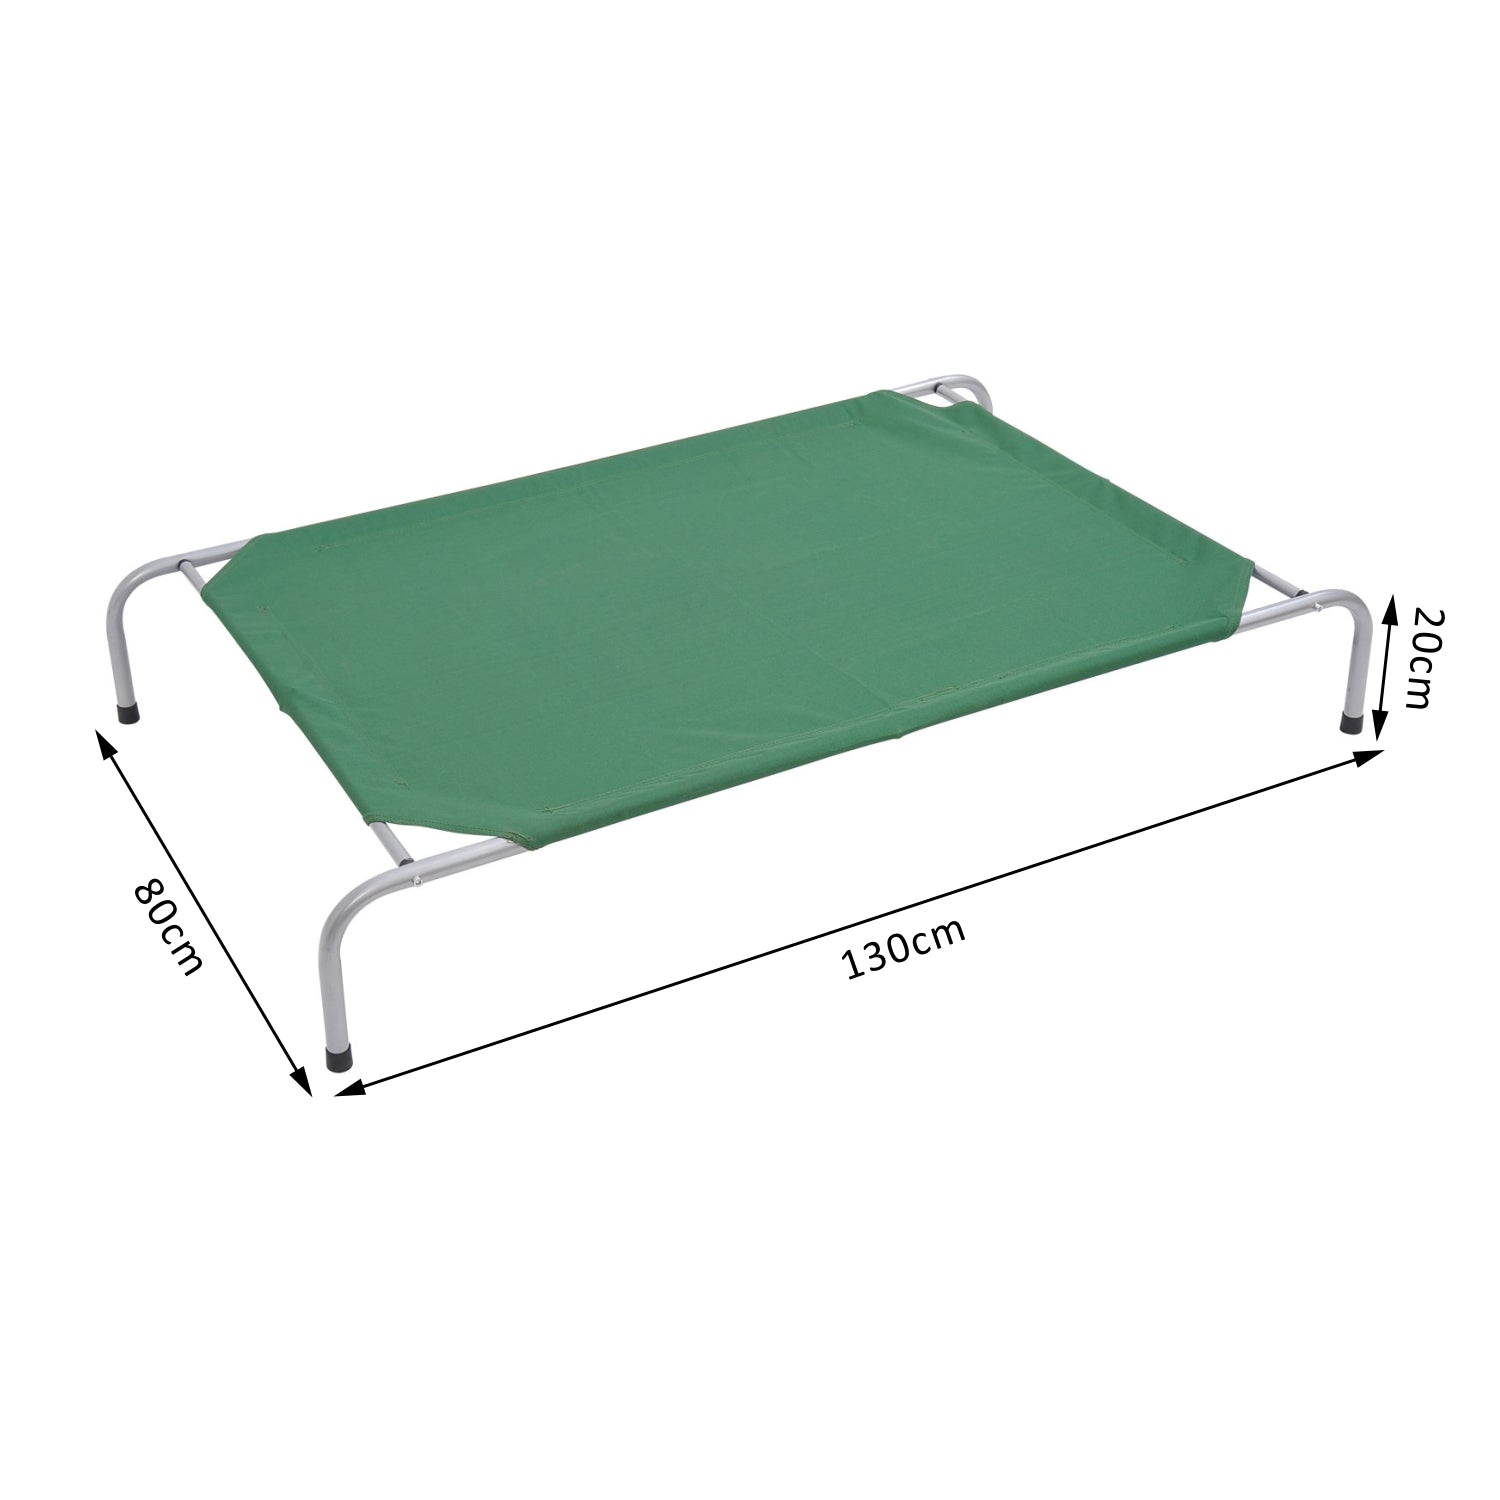 Portable Pets Elevated Raised Cot Bed-Green